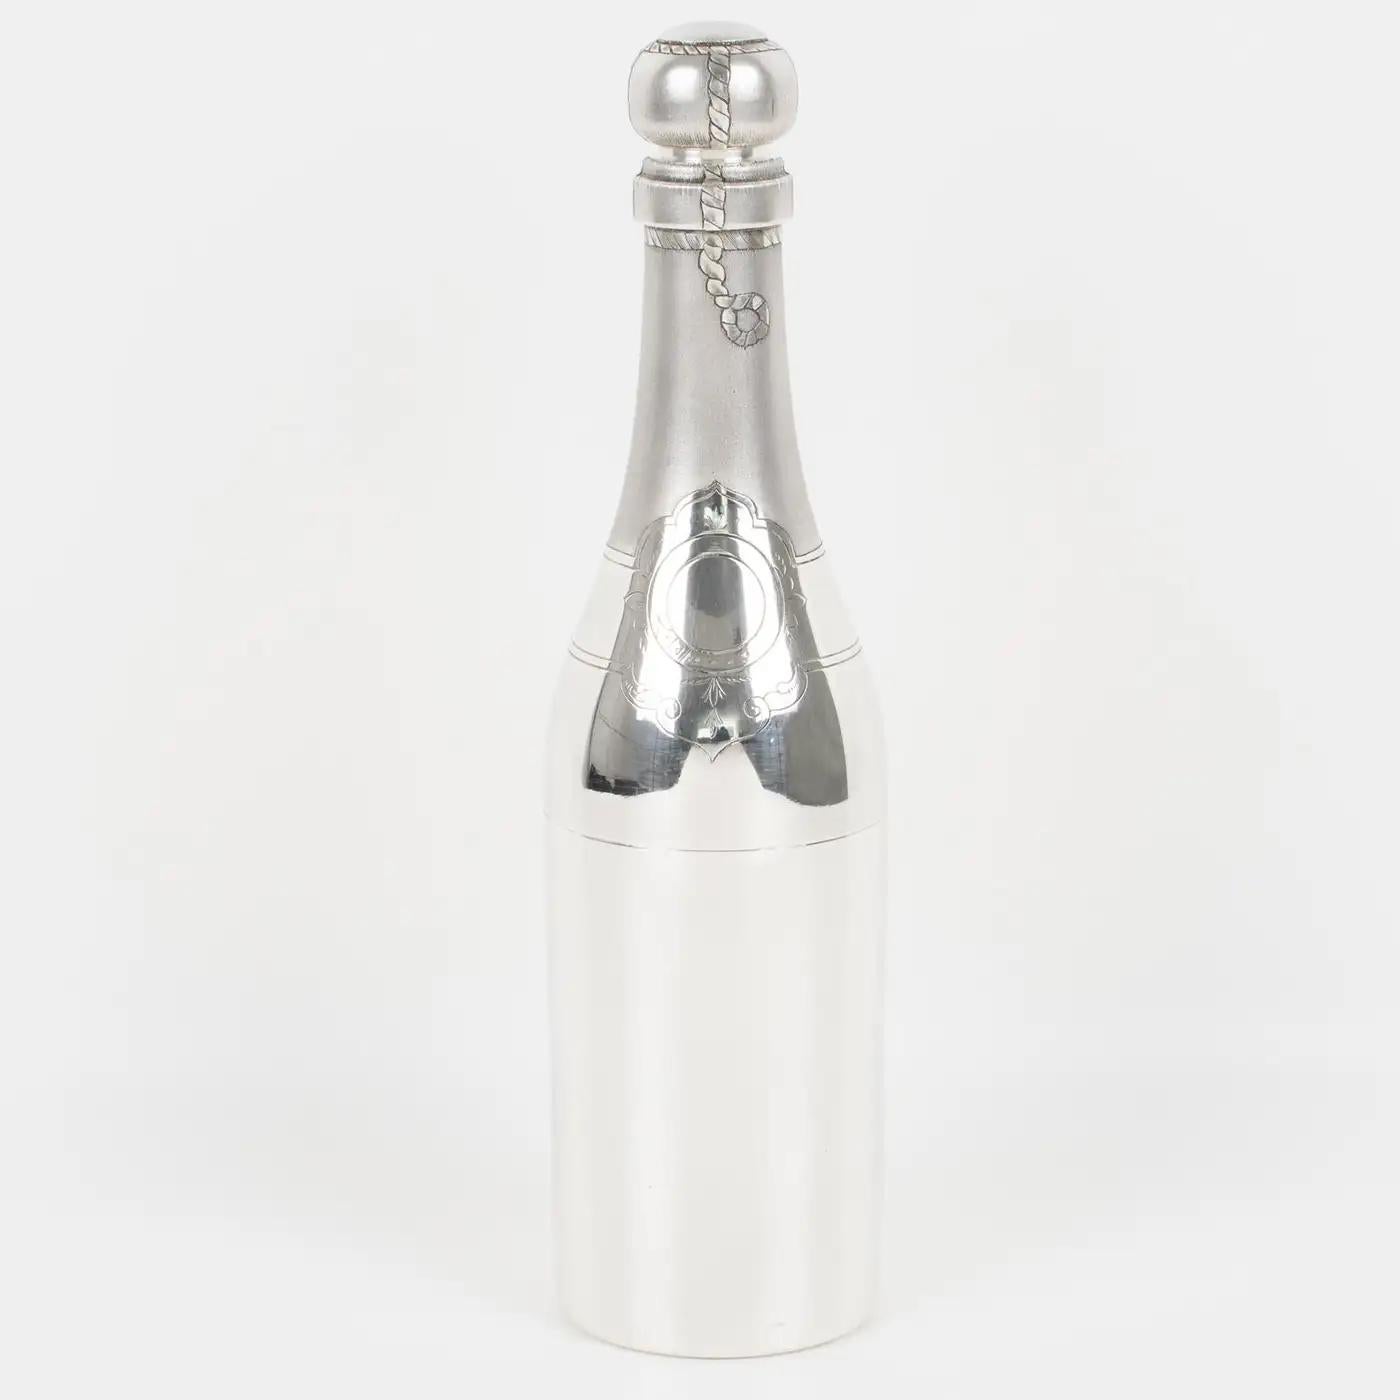 A stunning French Art Deco silver plate cocktail or Martini shaker with a champagne bottle shape designed by silversmith Vautrain, Paris. A tall champagne bottle shape with detailed and refined engraving. Three-sectioned designed cocktail shaker